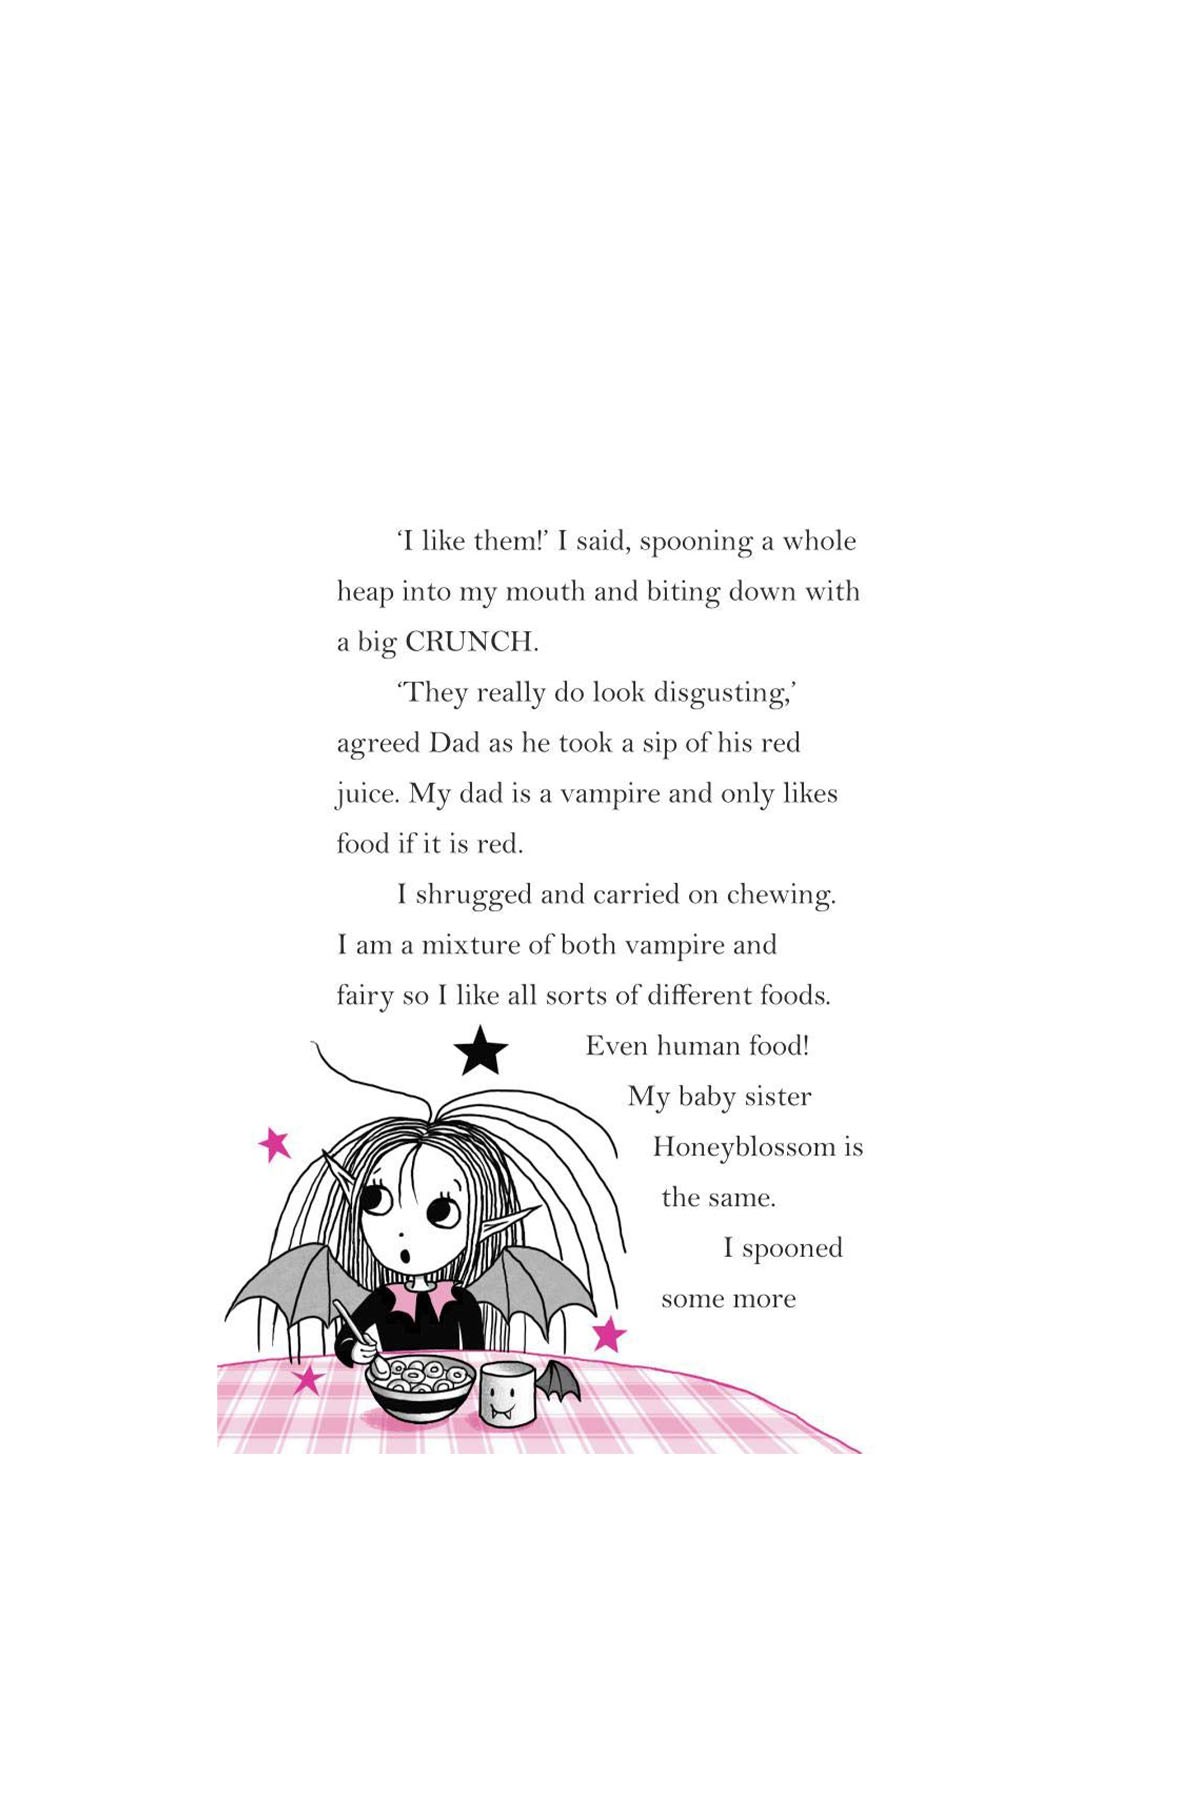 Oxford Childrens Book - Isadora Moon Meets The Tooth Fairy